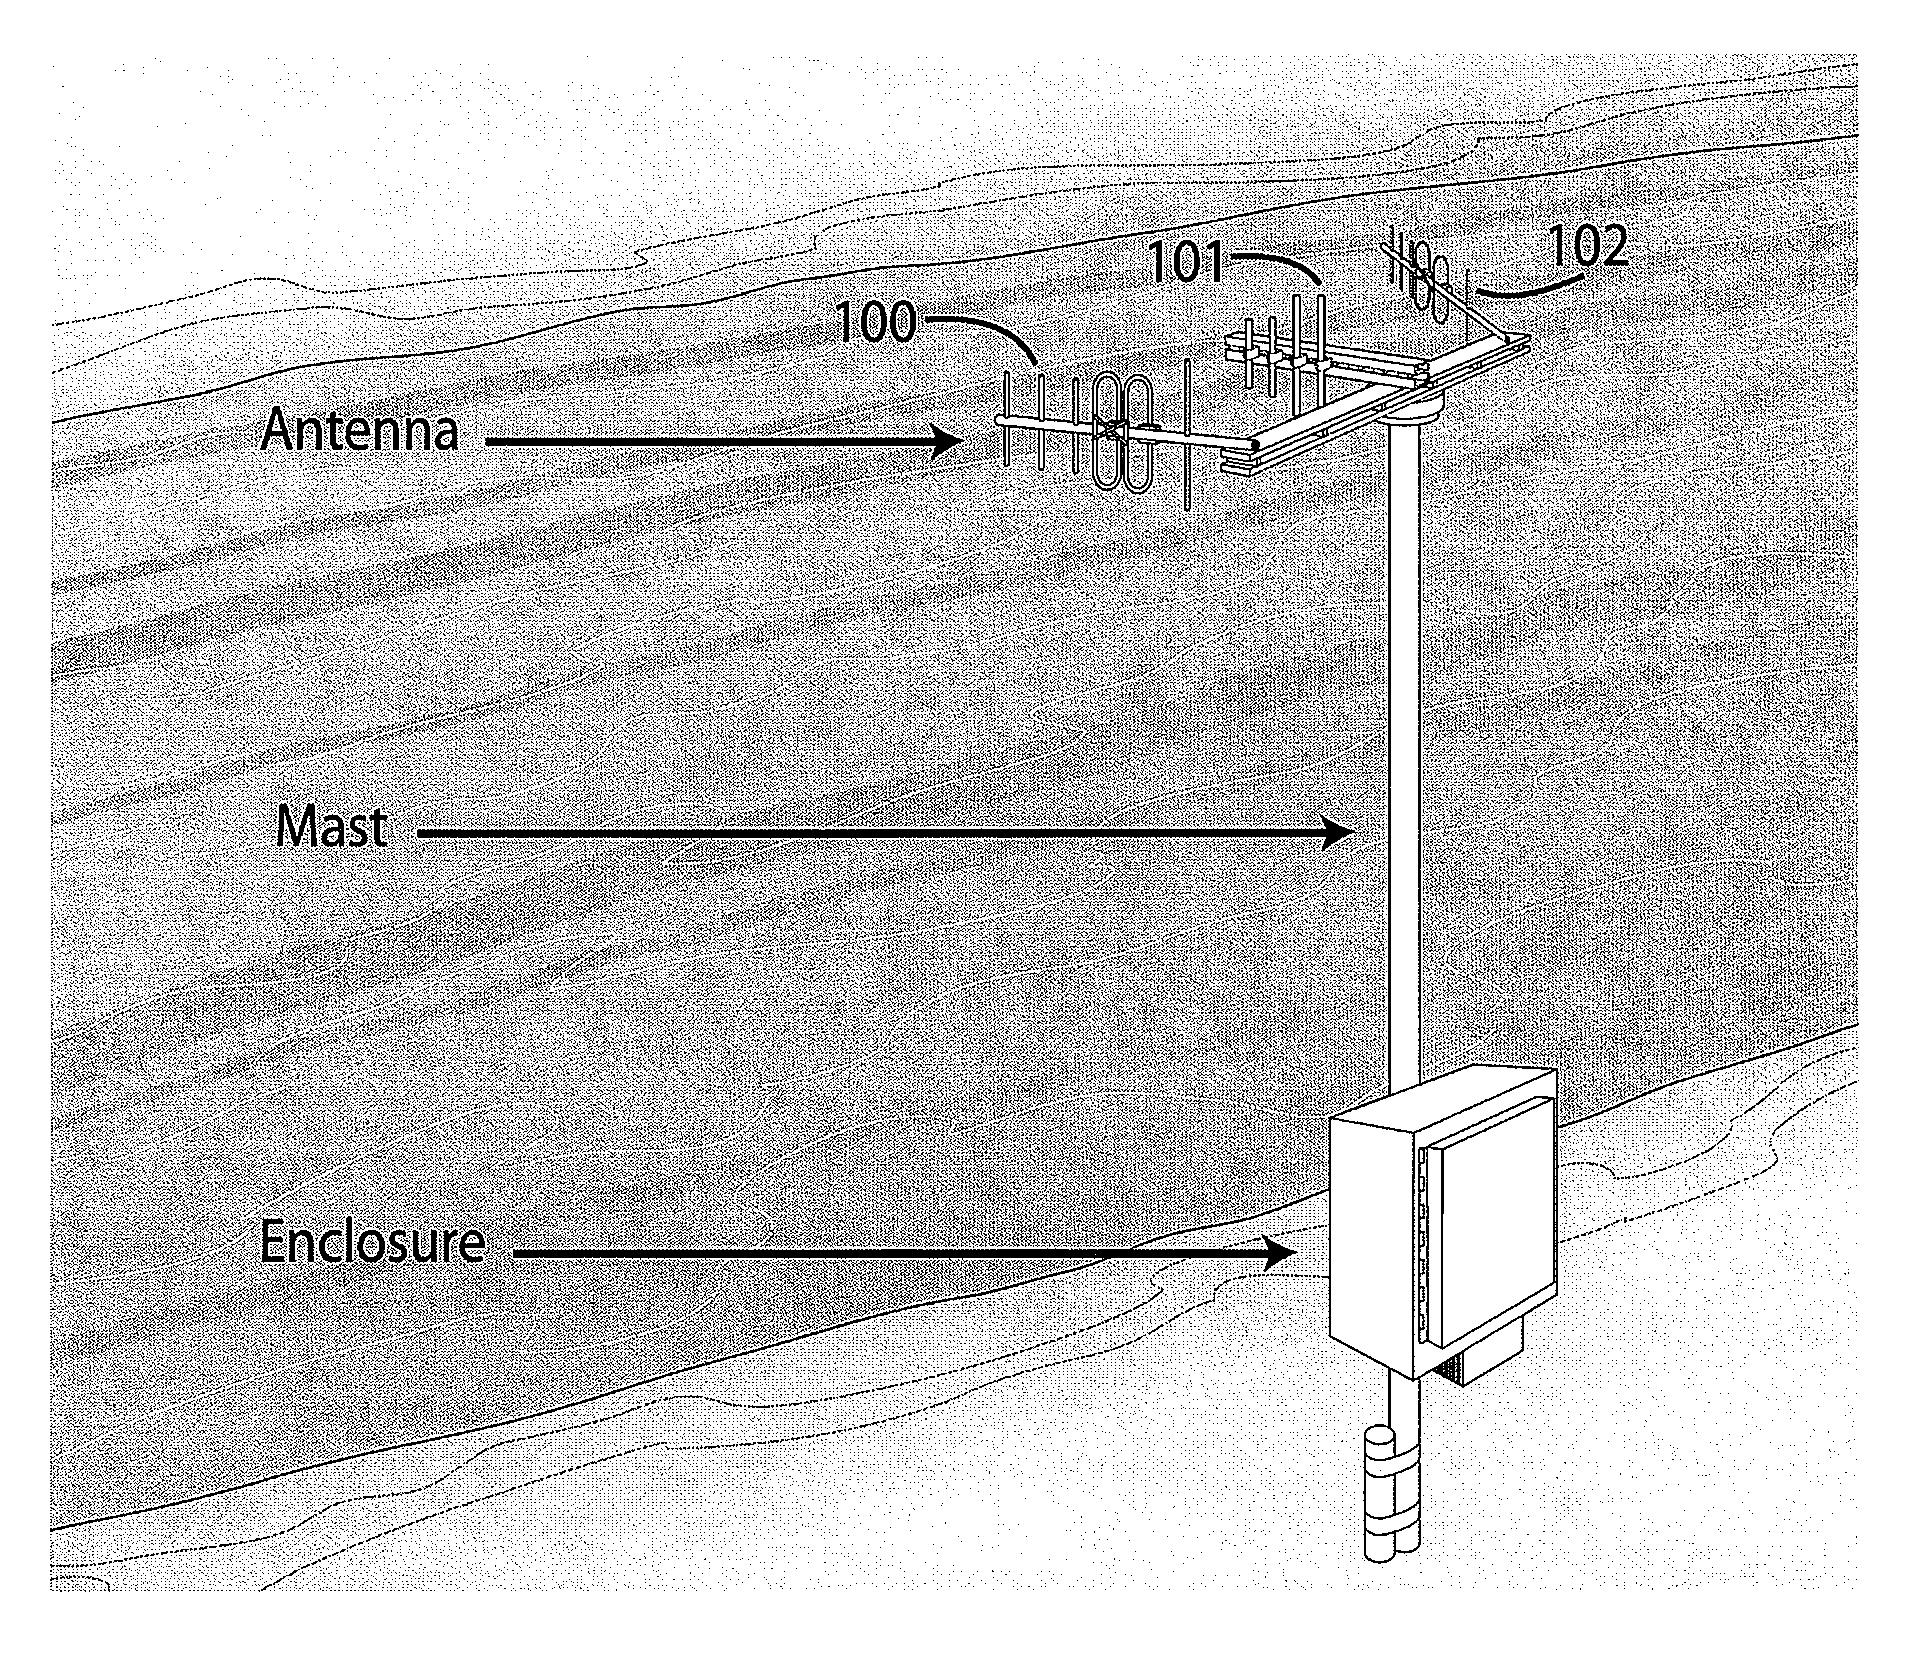 Systems and methods for monitoring river flow parameters using a vhf/uhf radar station